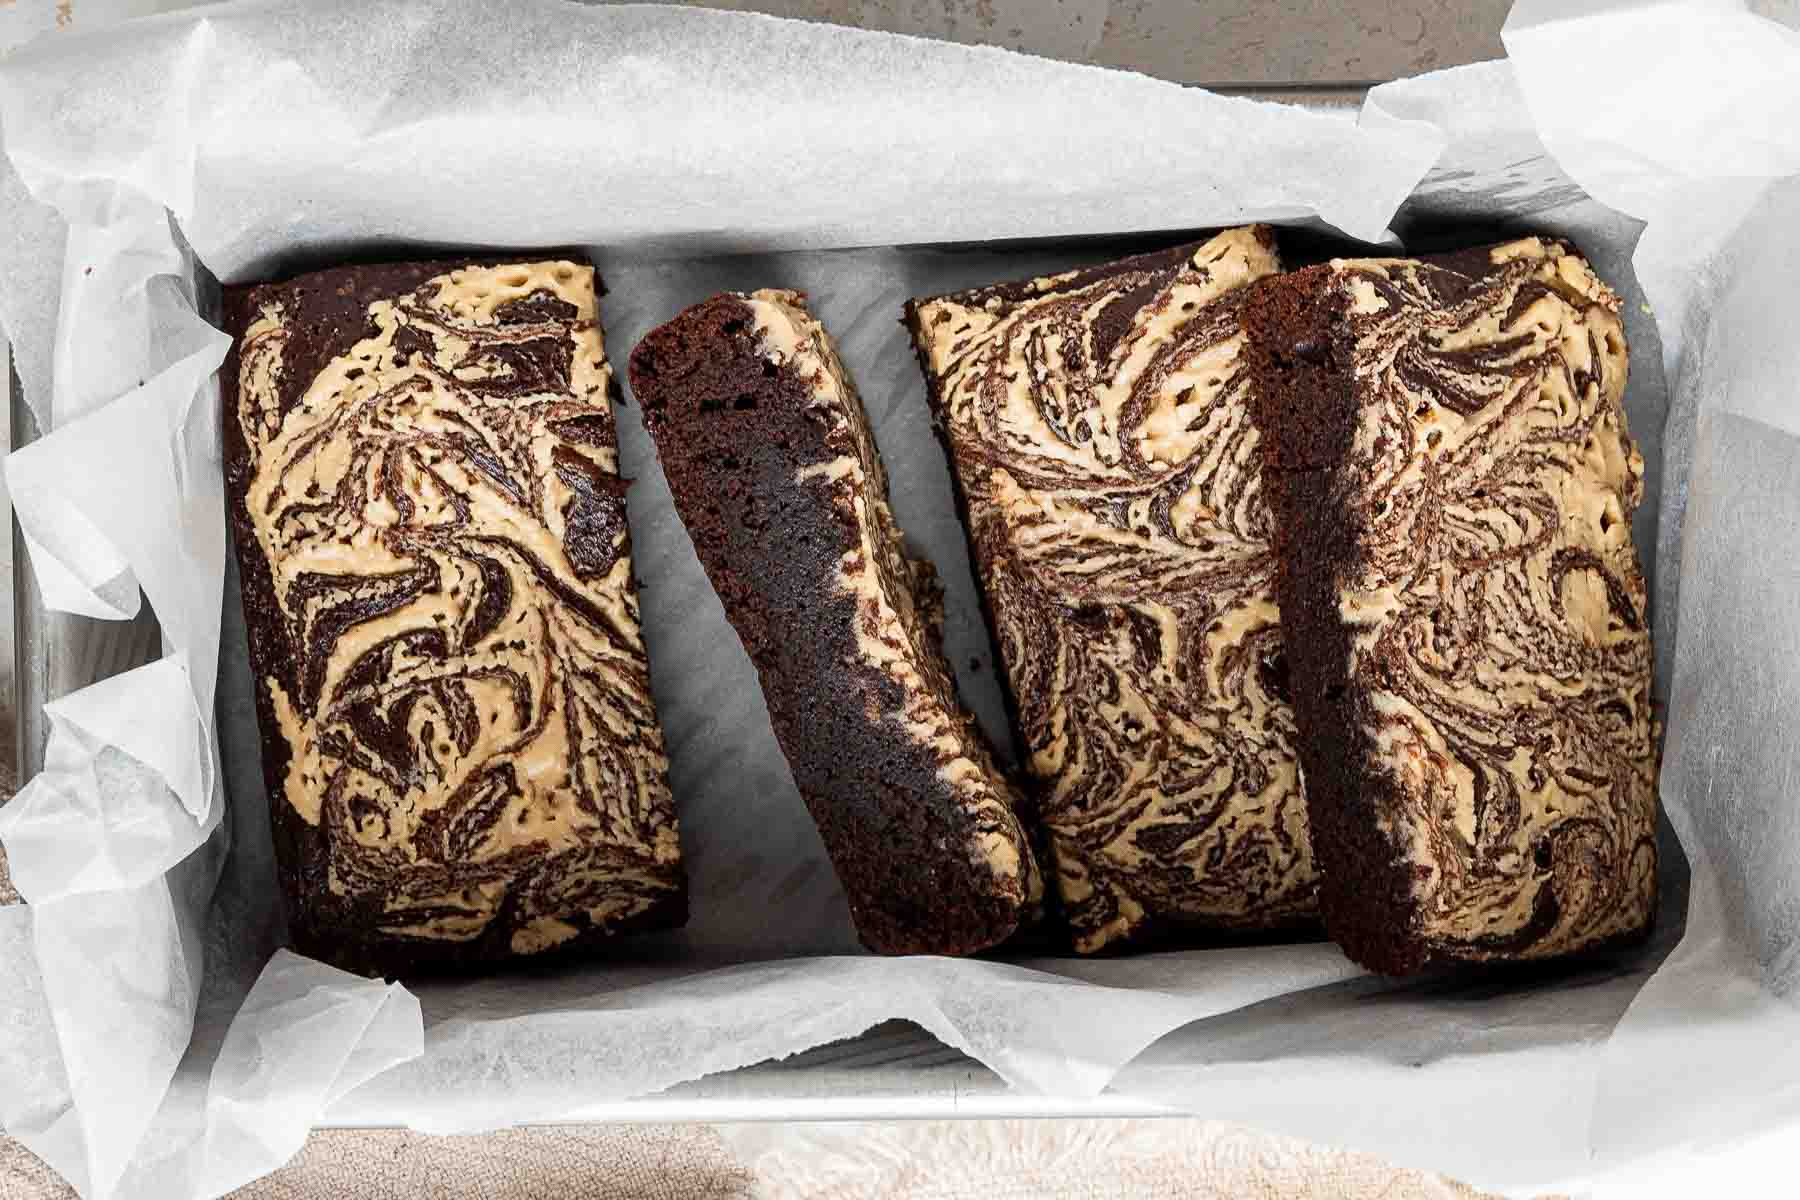 Baked brownies with tahini swirl on top surface.